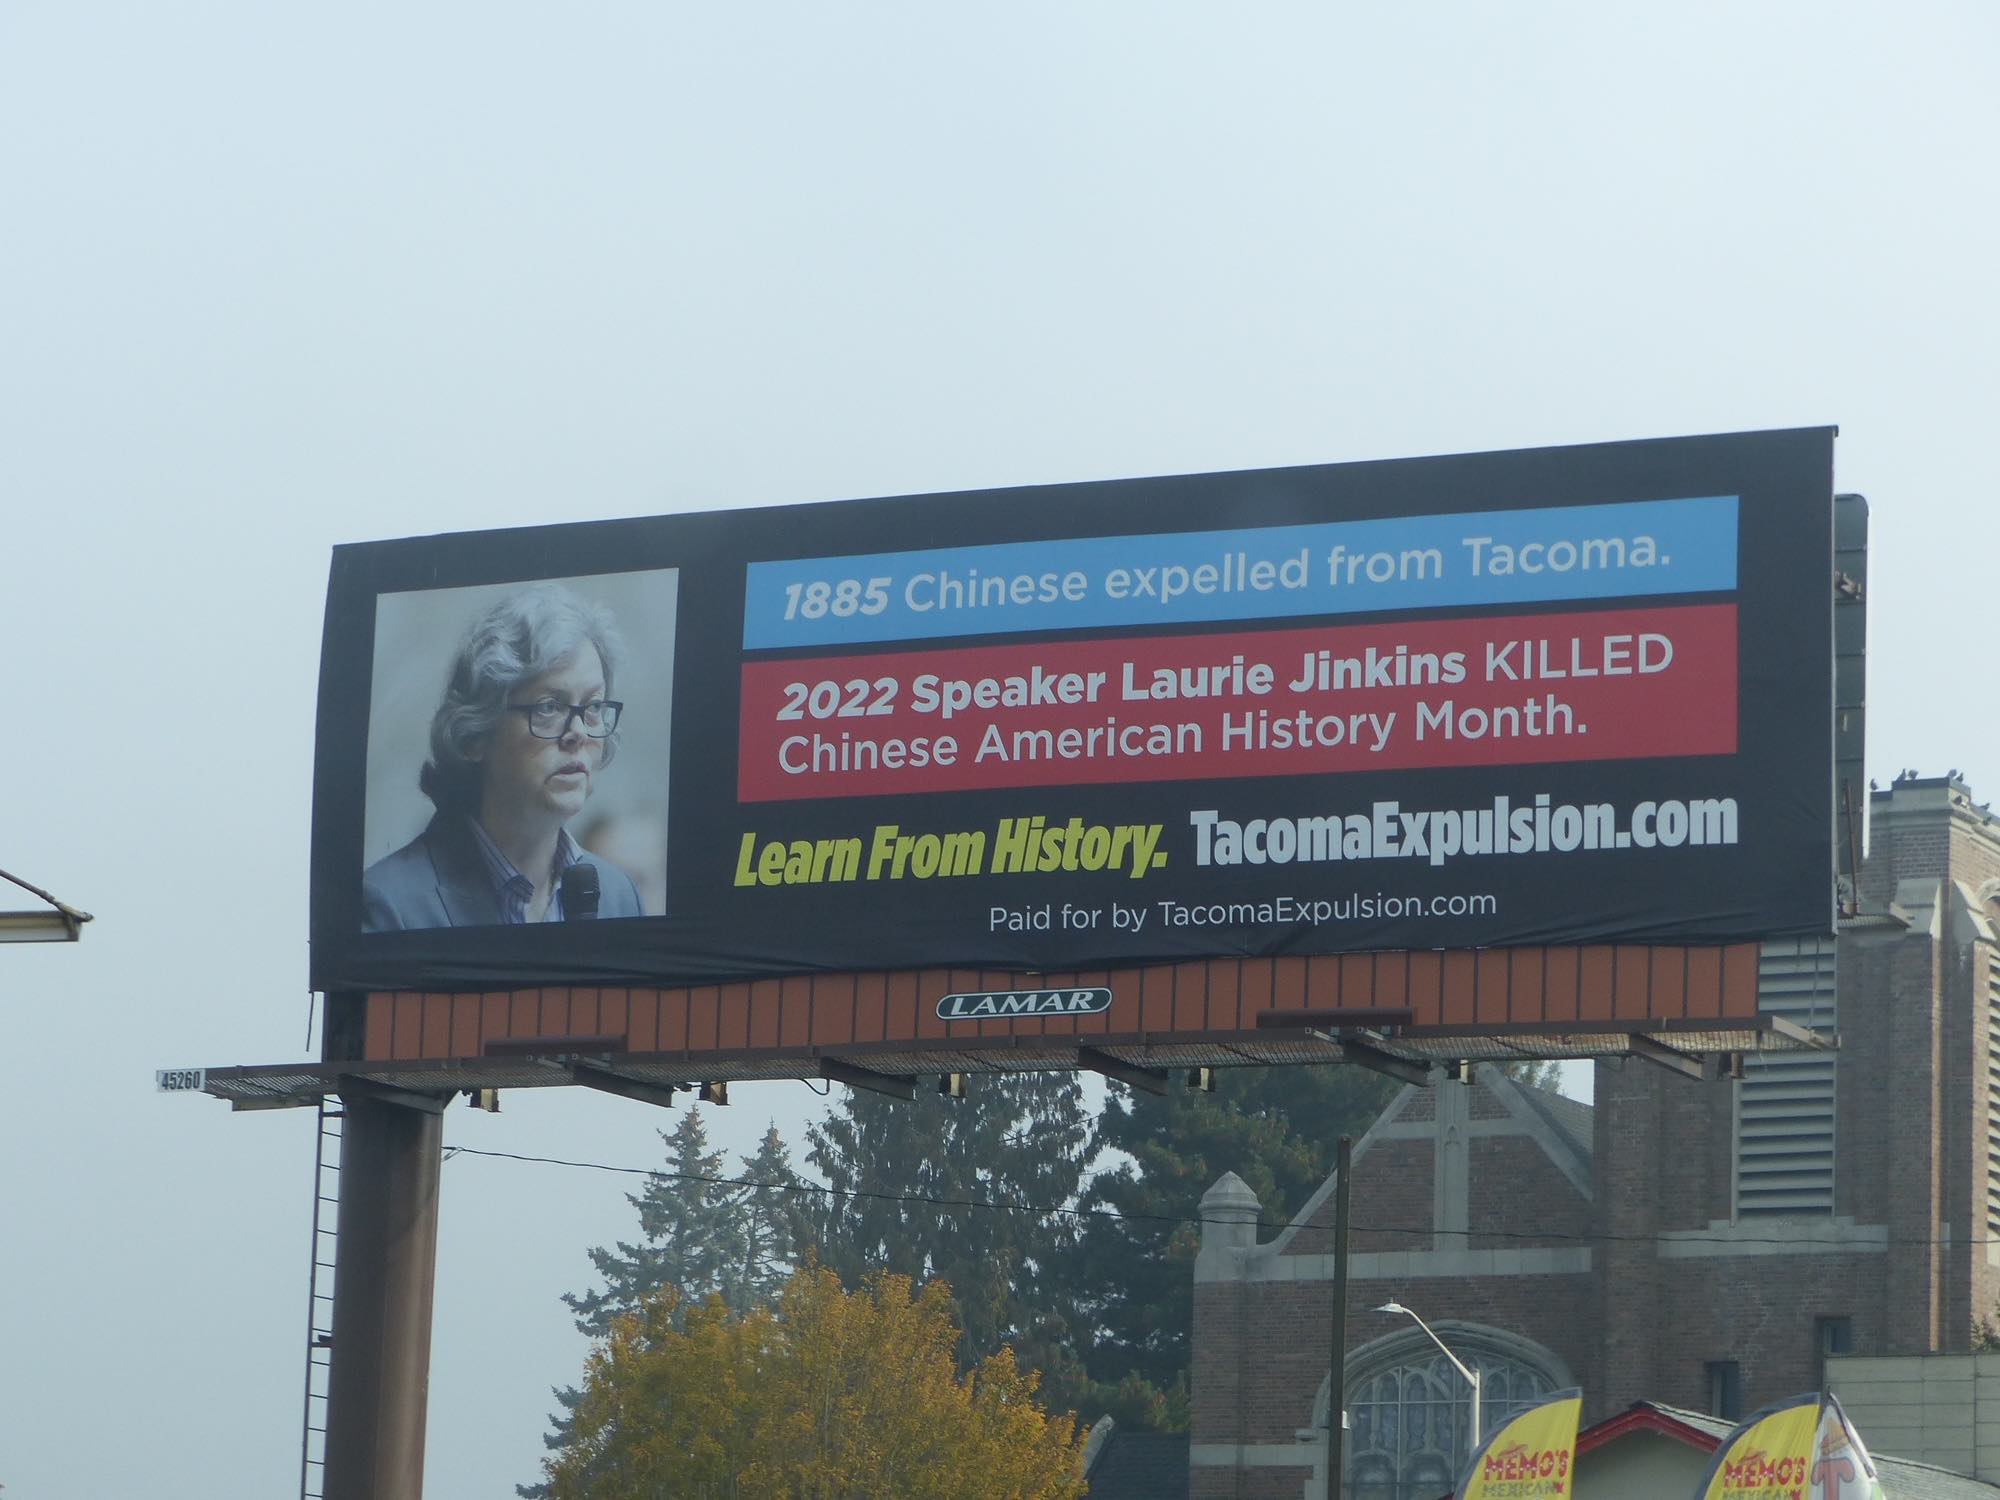 A third billboard is up in Tacoma across from a middle school. The message on the board says "Learn From History"